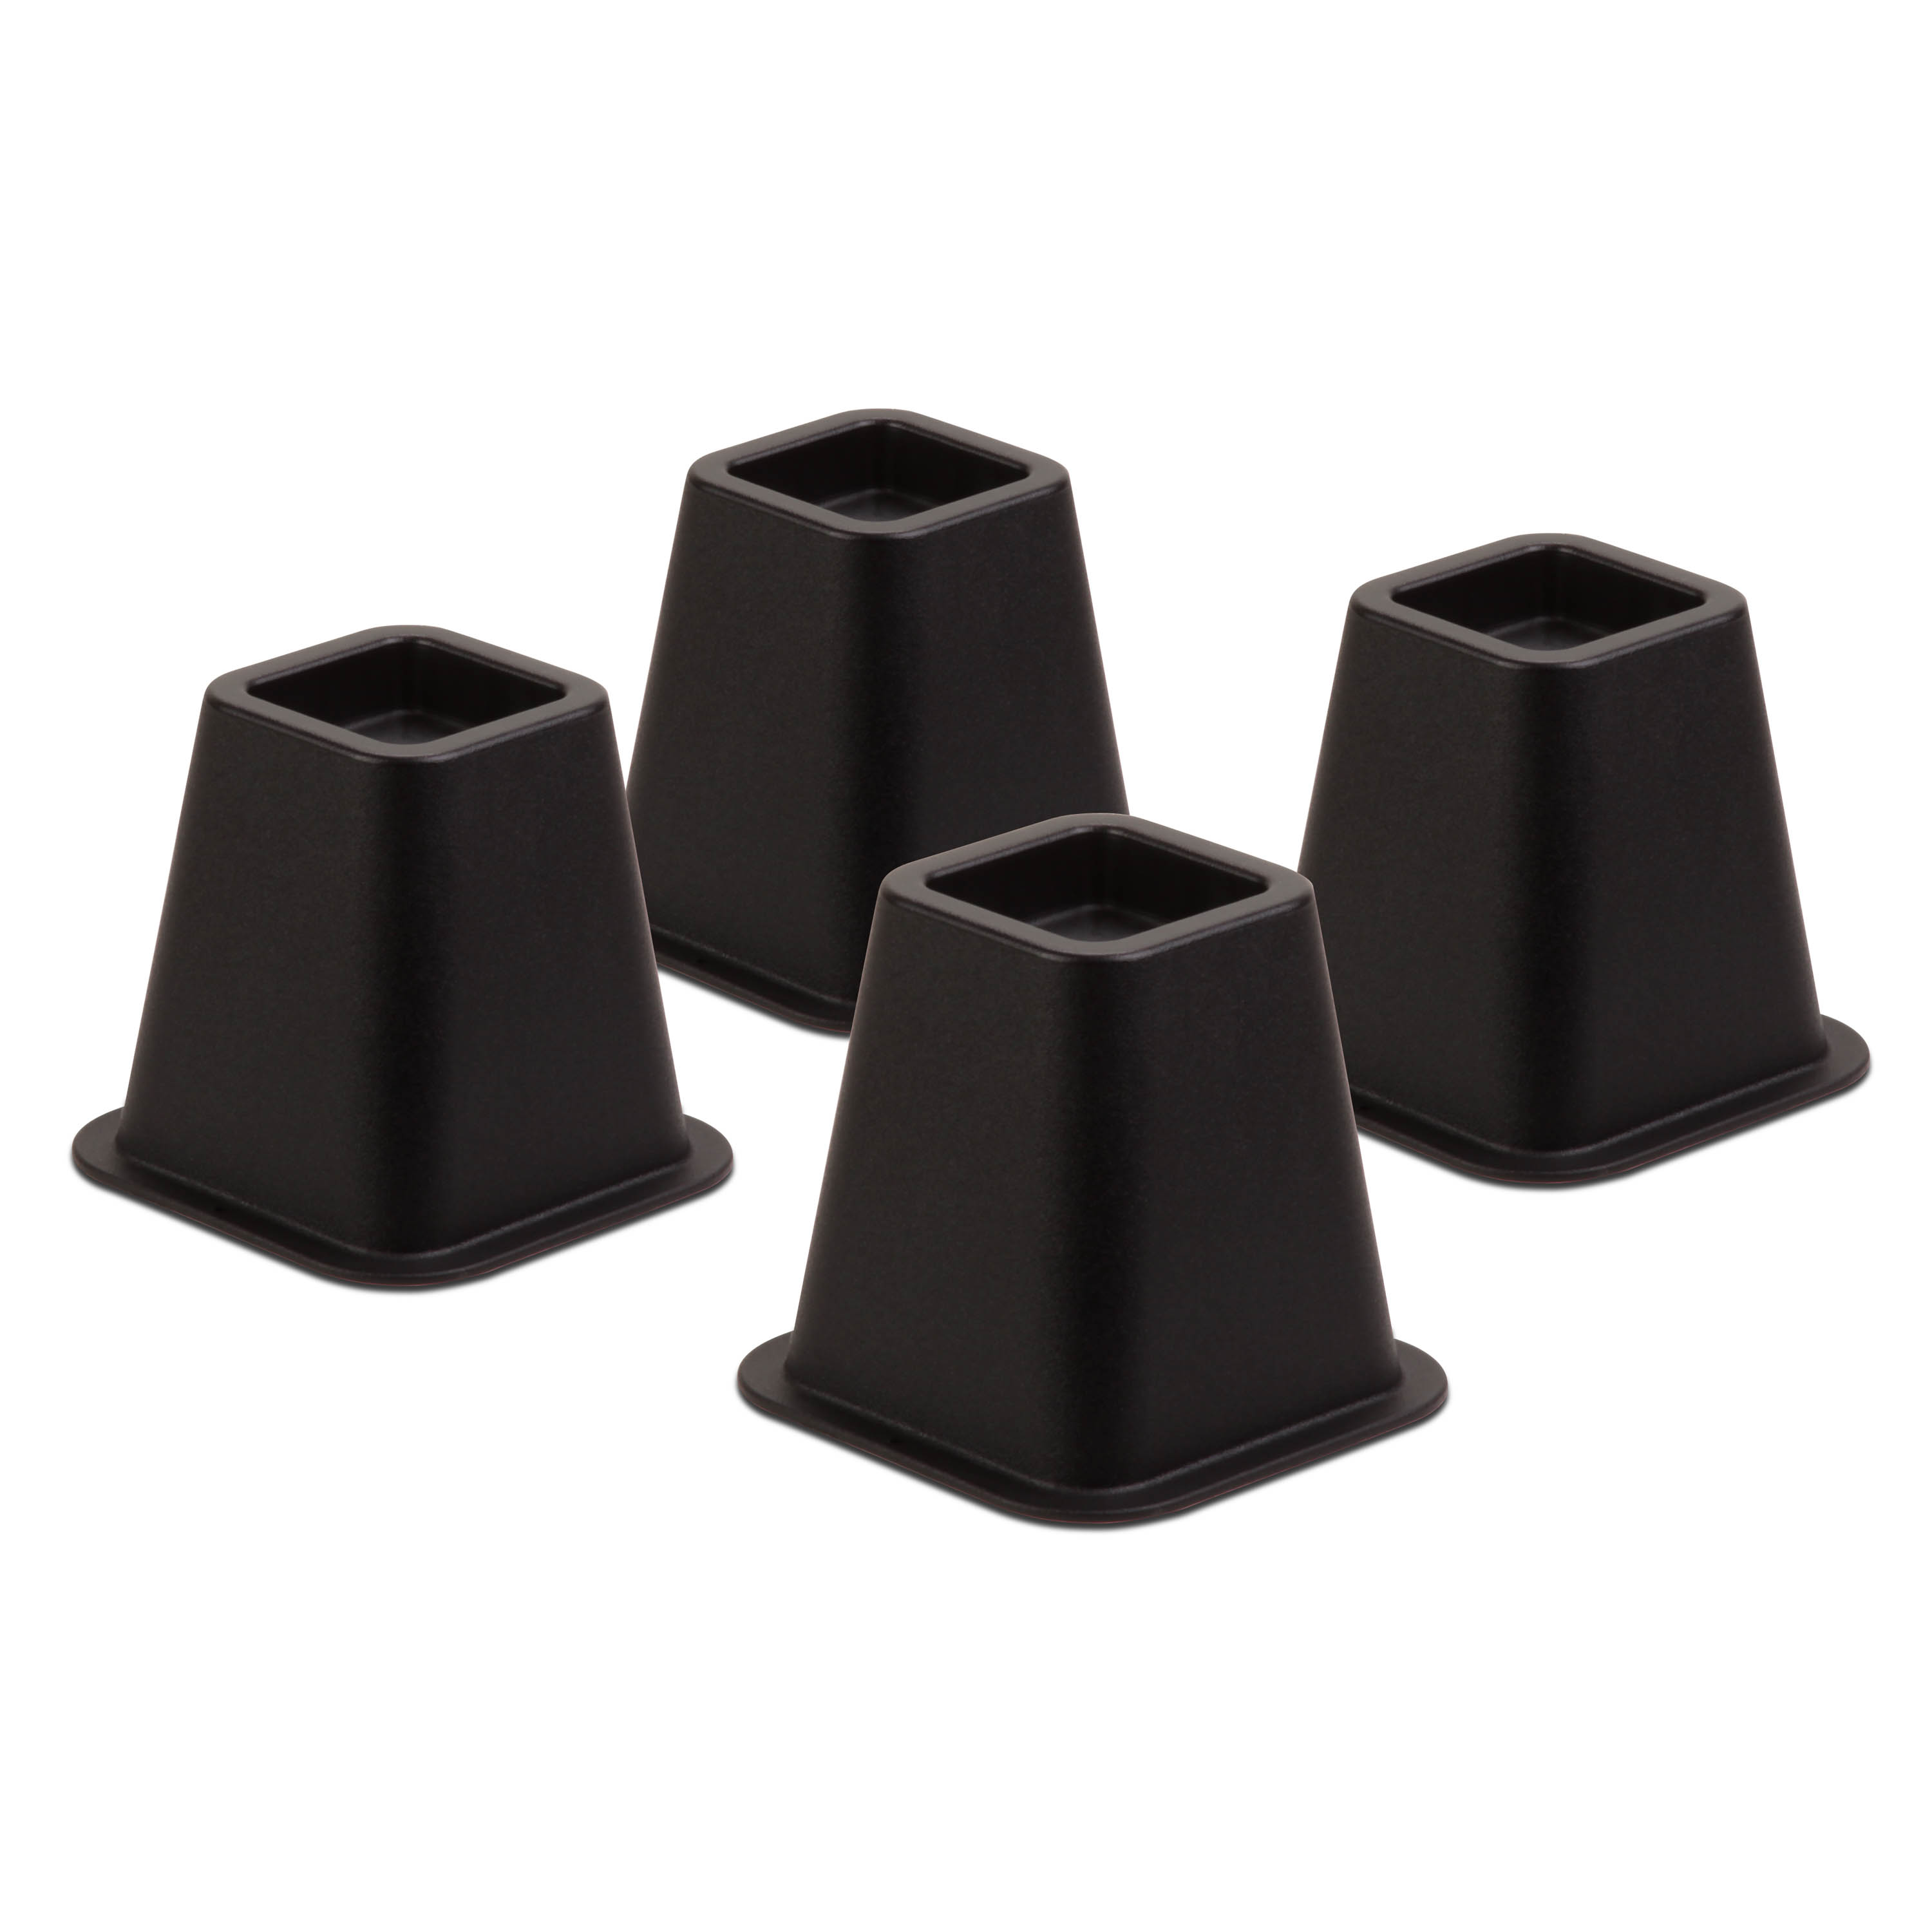 Honey-Can-Do Black Plastic 6" Bed Risers, Set of 4 - image 2 of 4